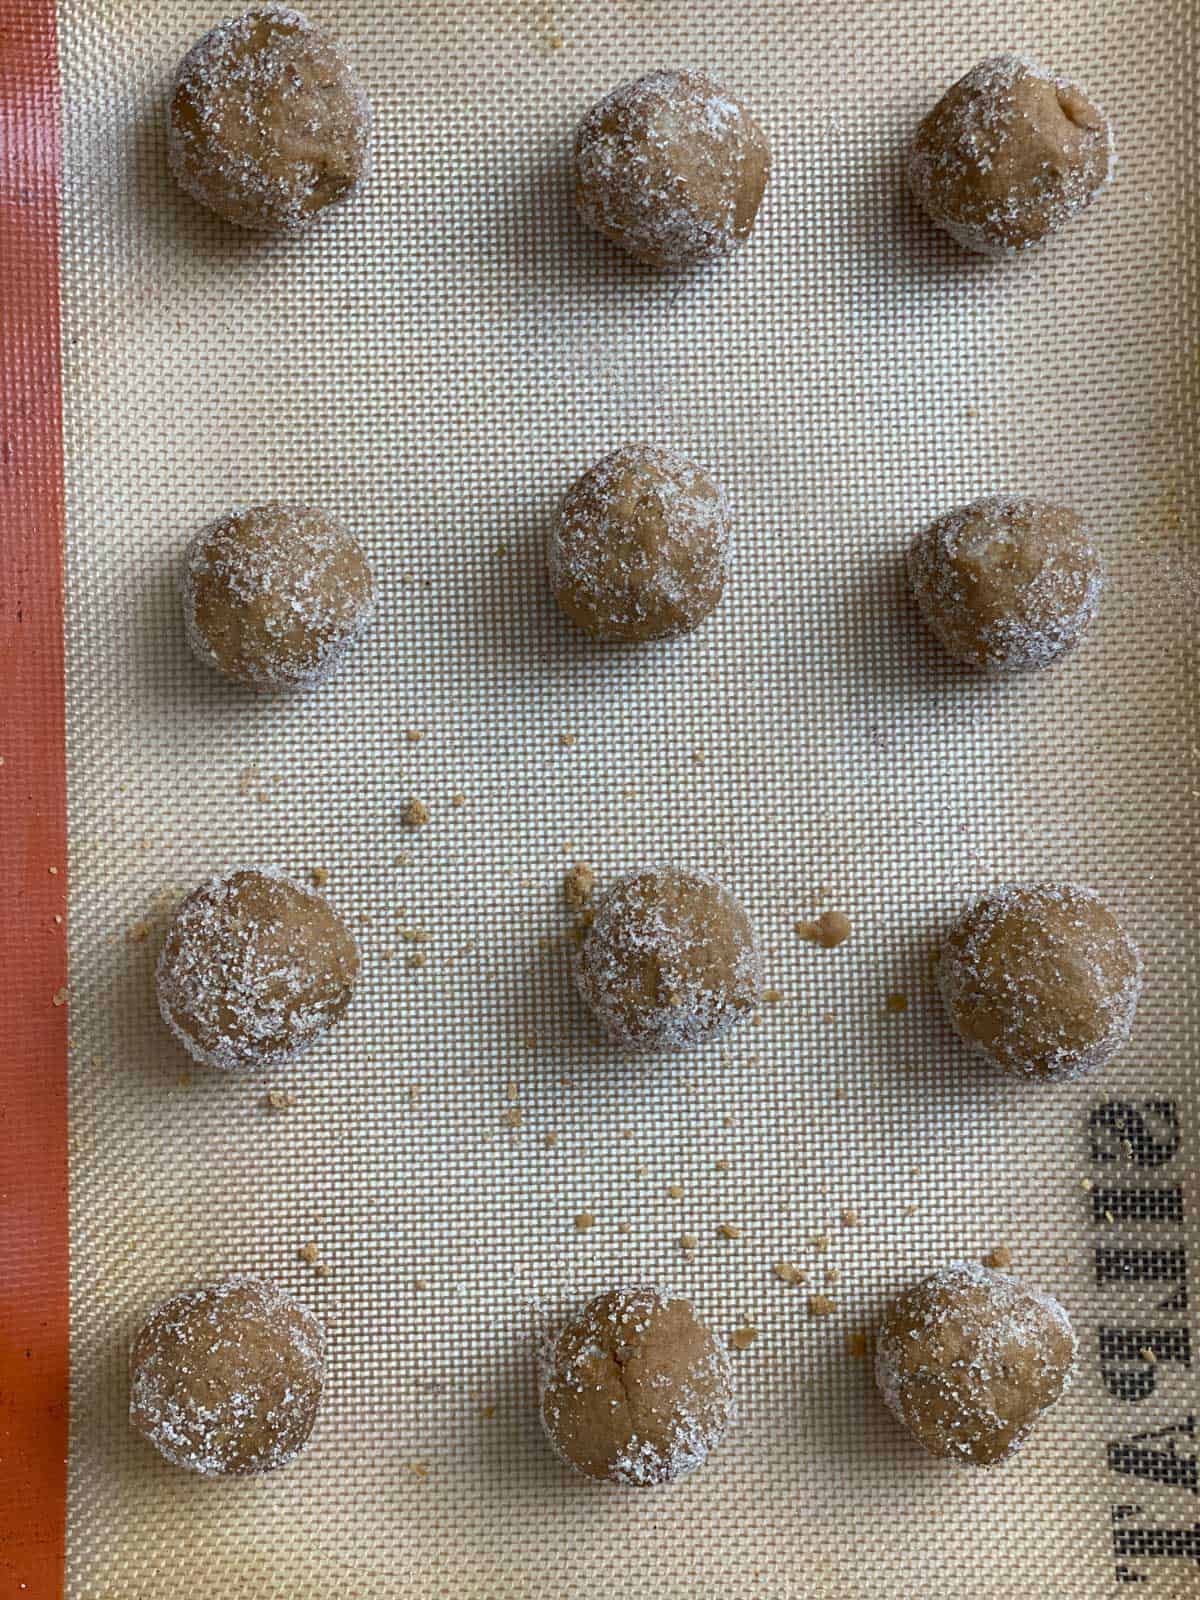 several pre baked Triple Ginger Vegan Cookies [Gingersnaps] on a baking tray